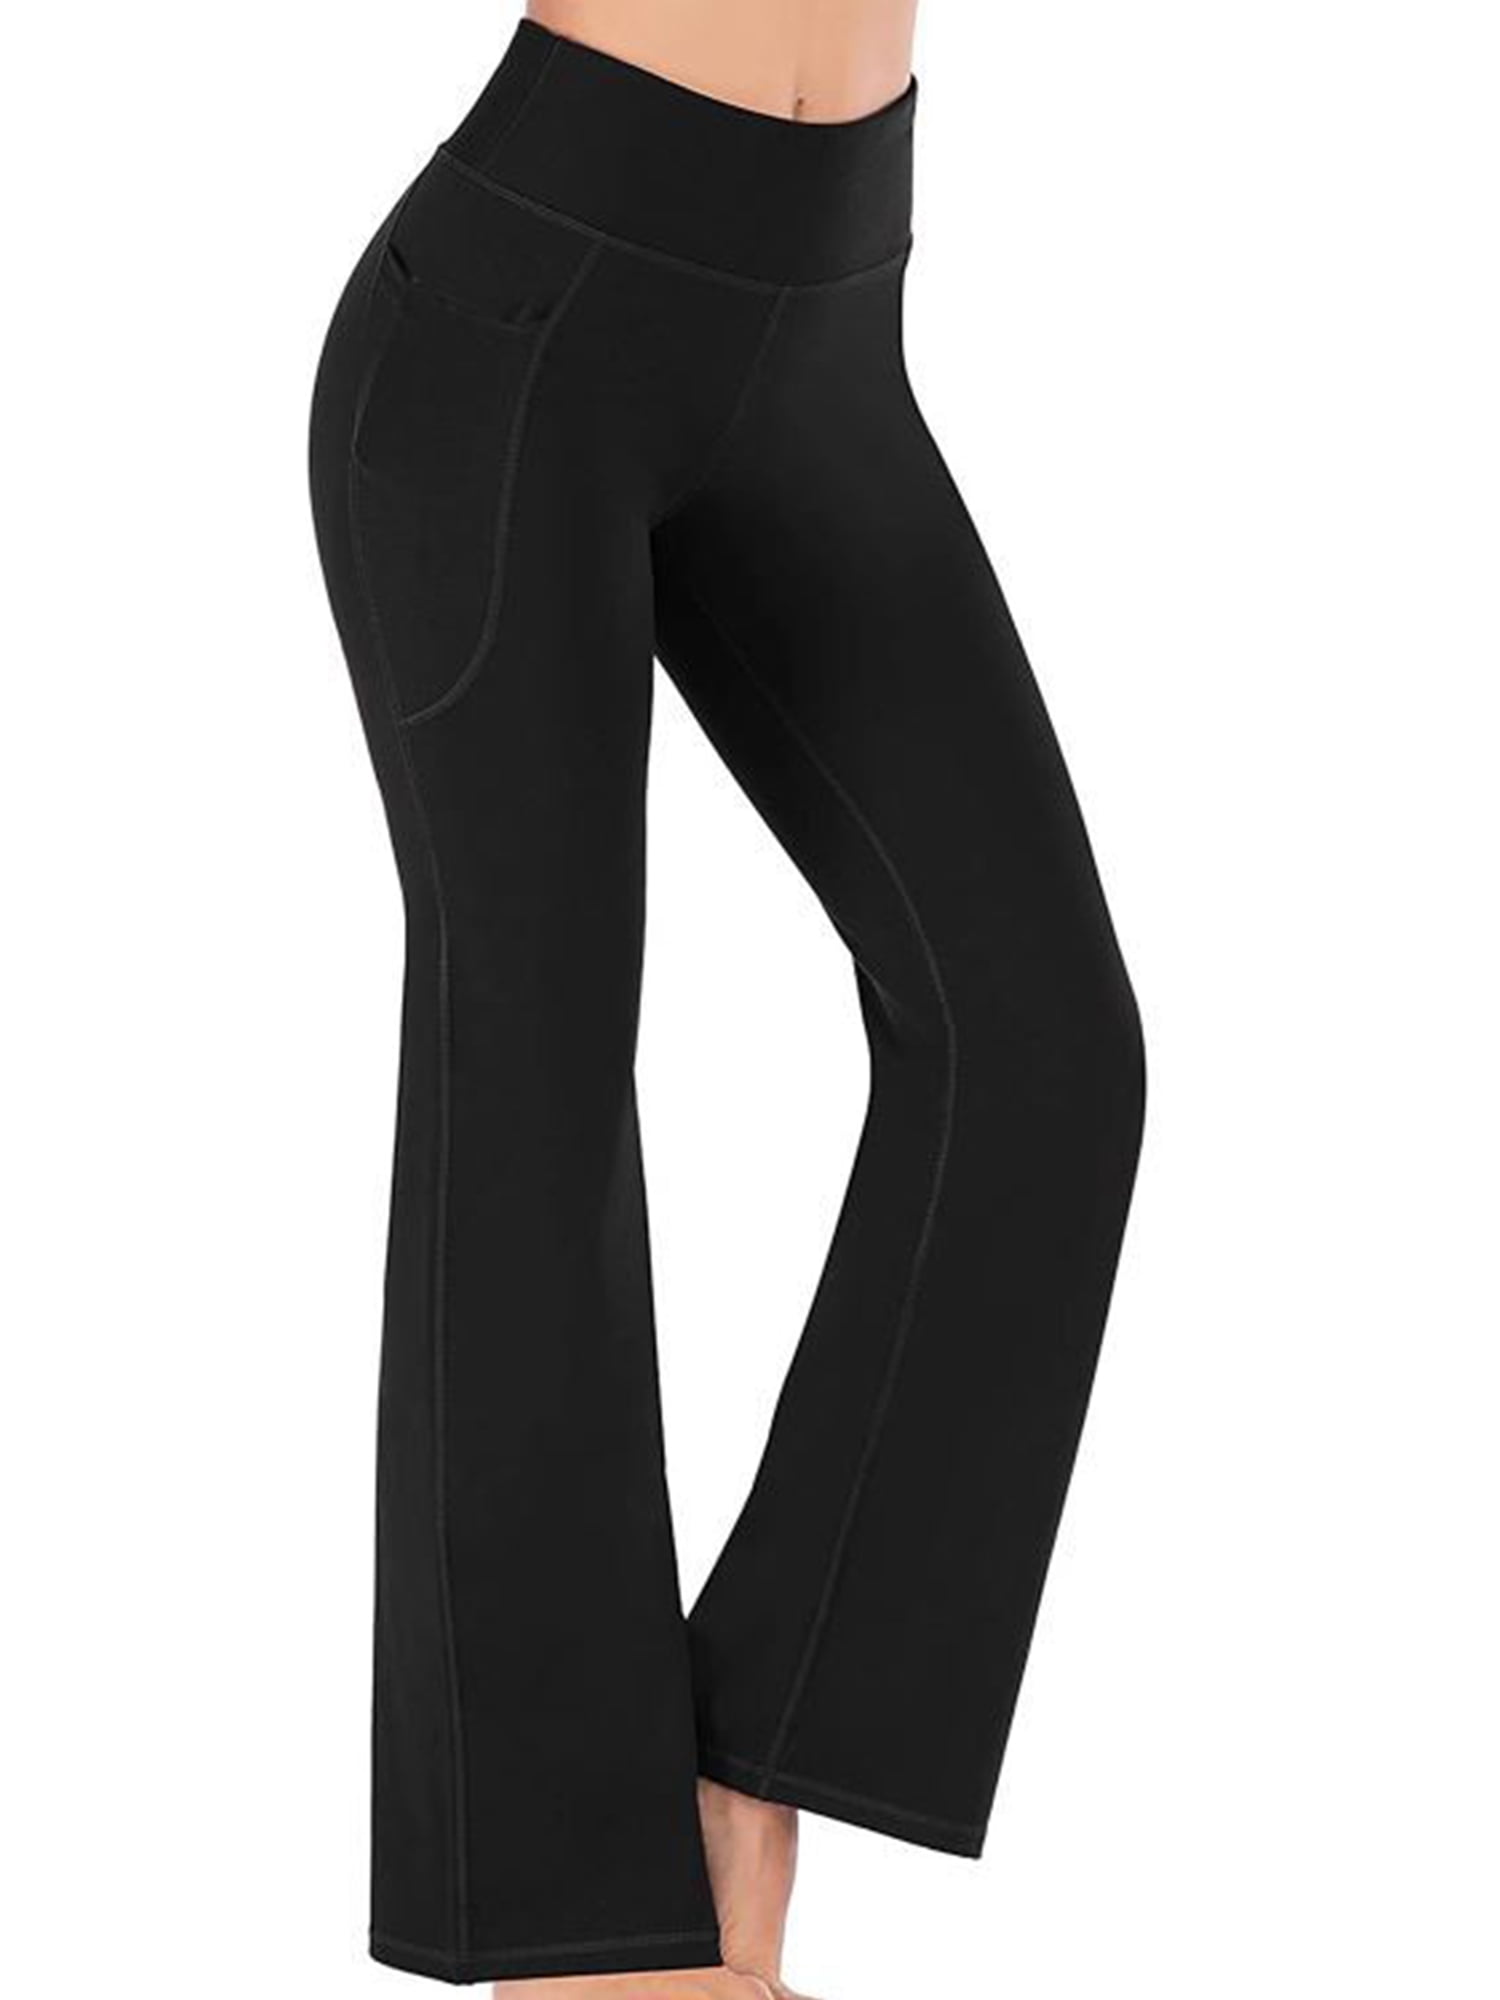 Details about   Women High Waist Yoga Pants Flare Wide Leg Gym Sports Bootcut Fitness Trousers S 